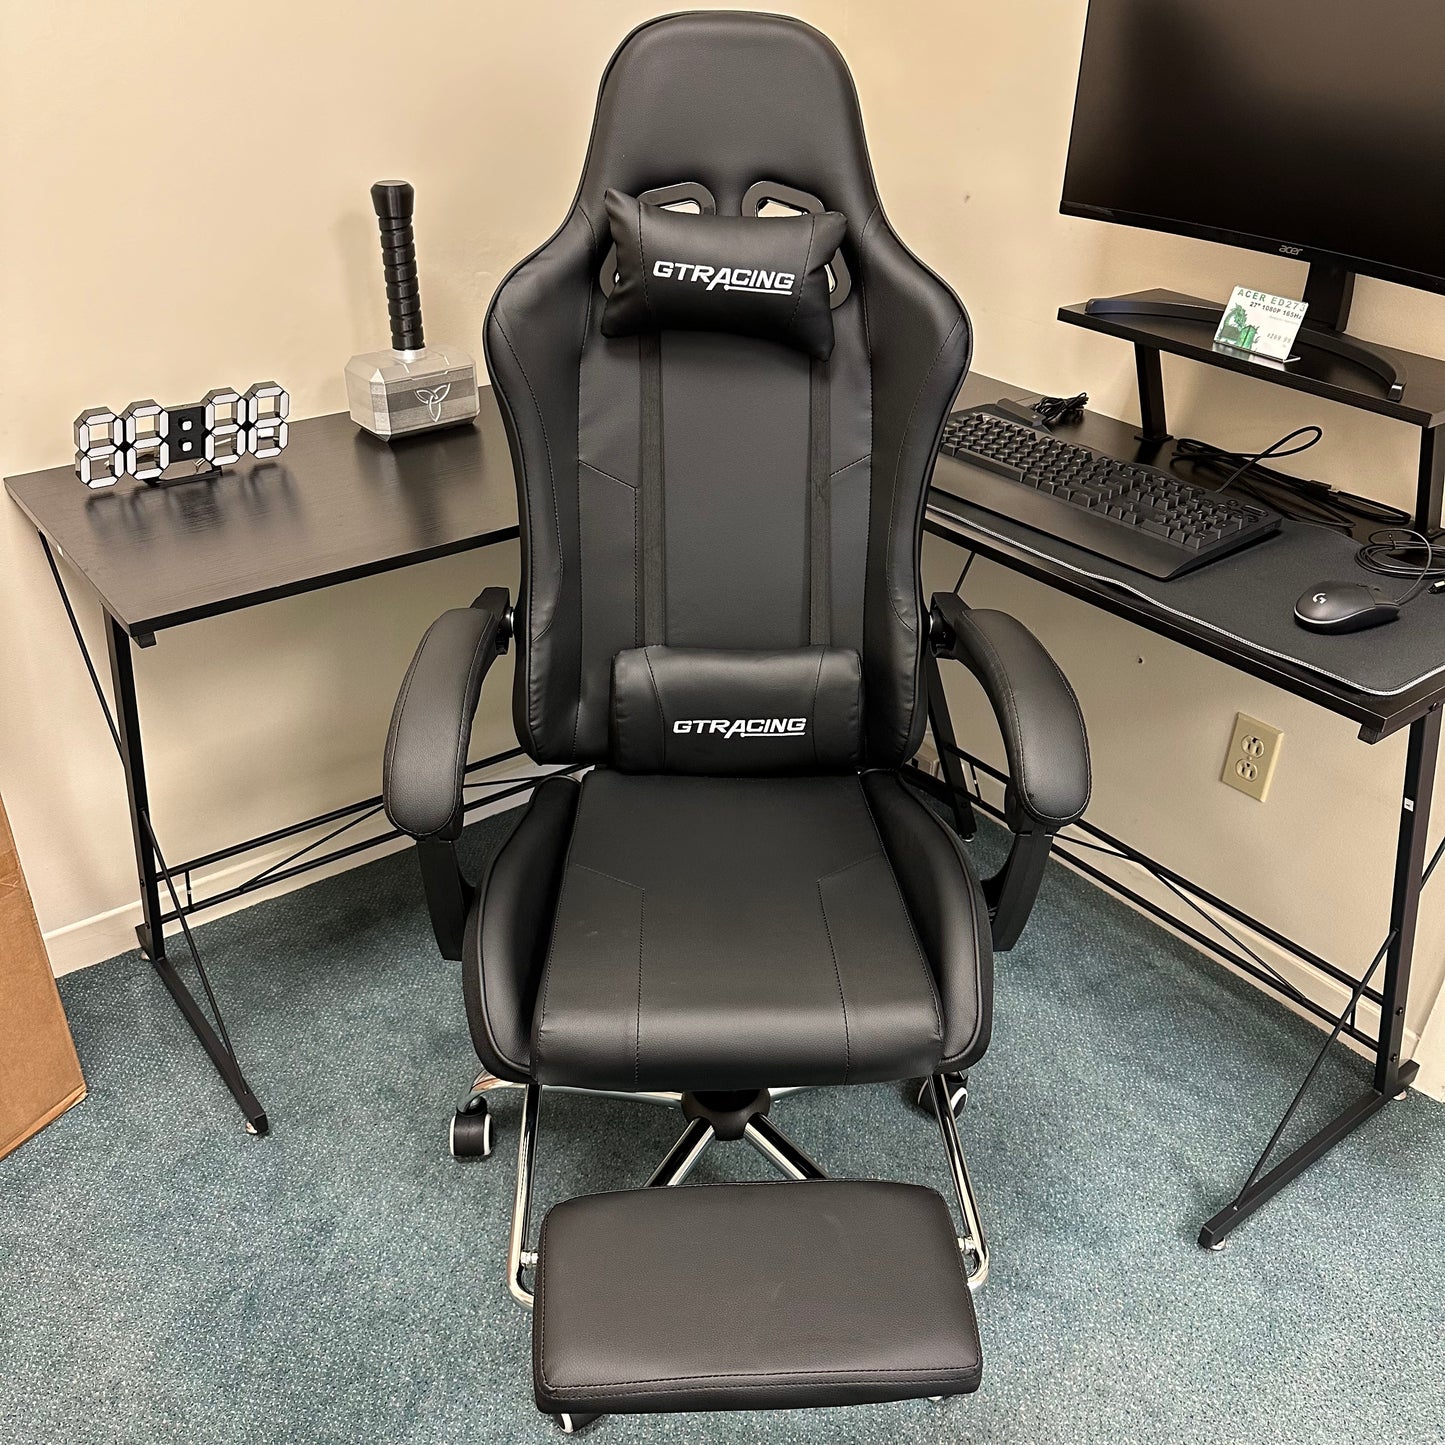 GTRacing Gaming chair - GT800A6 Blk